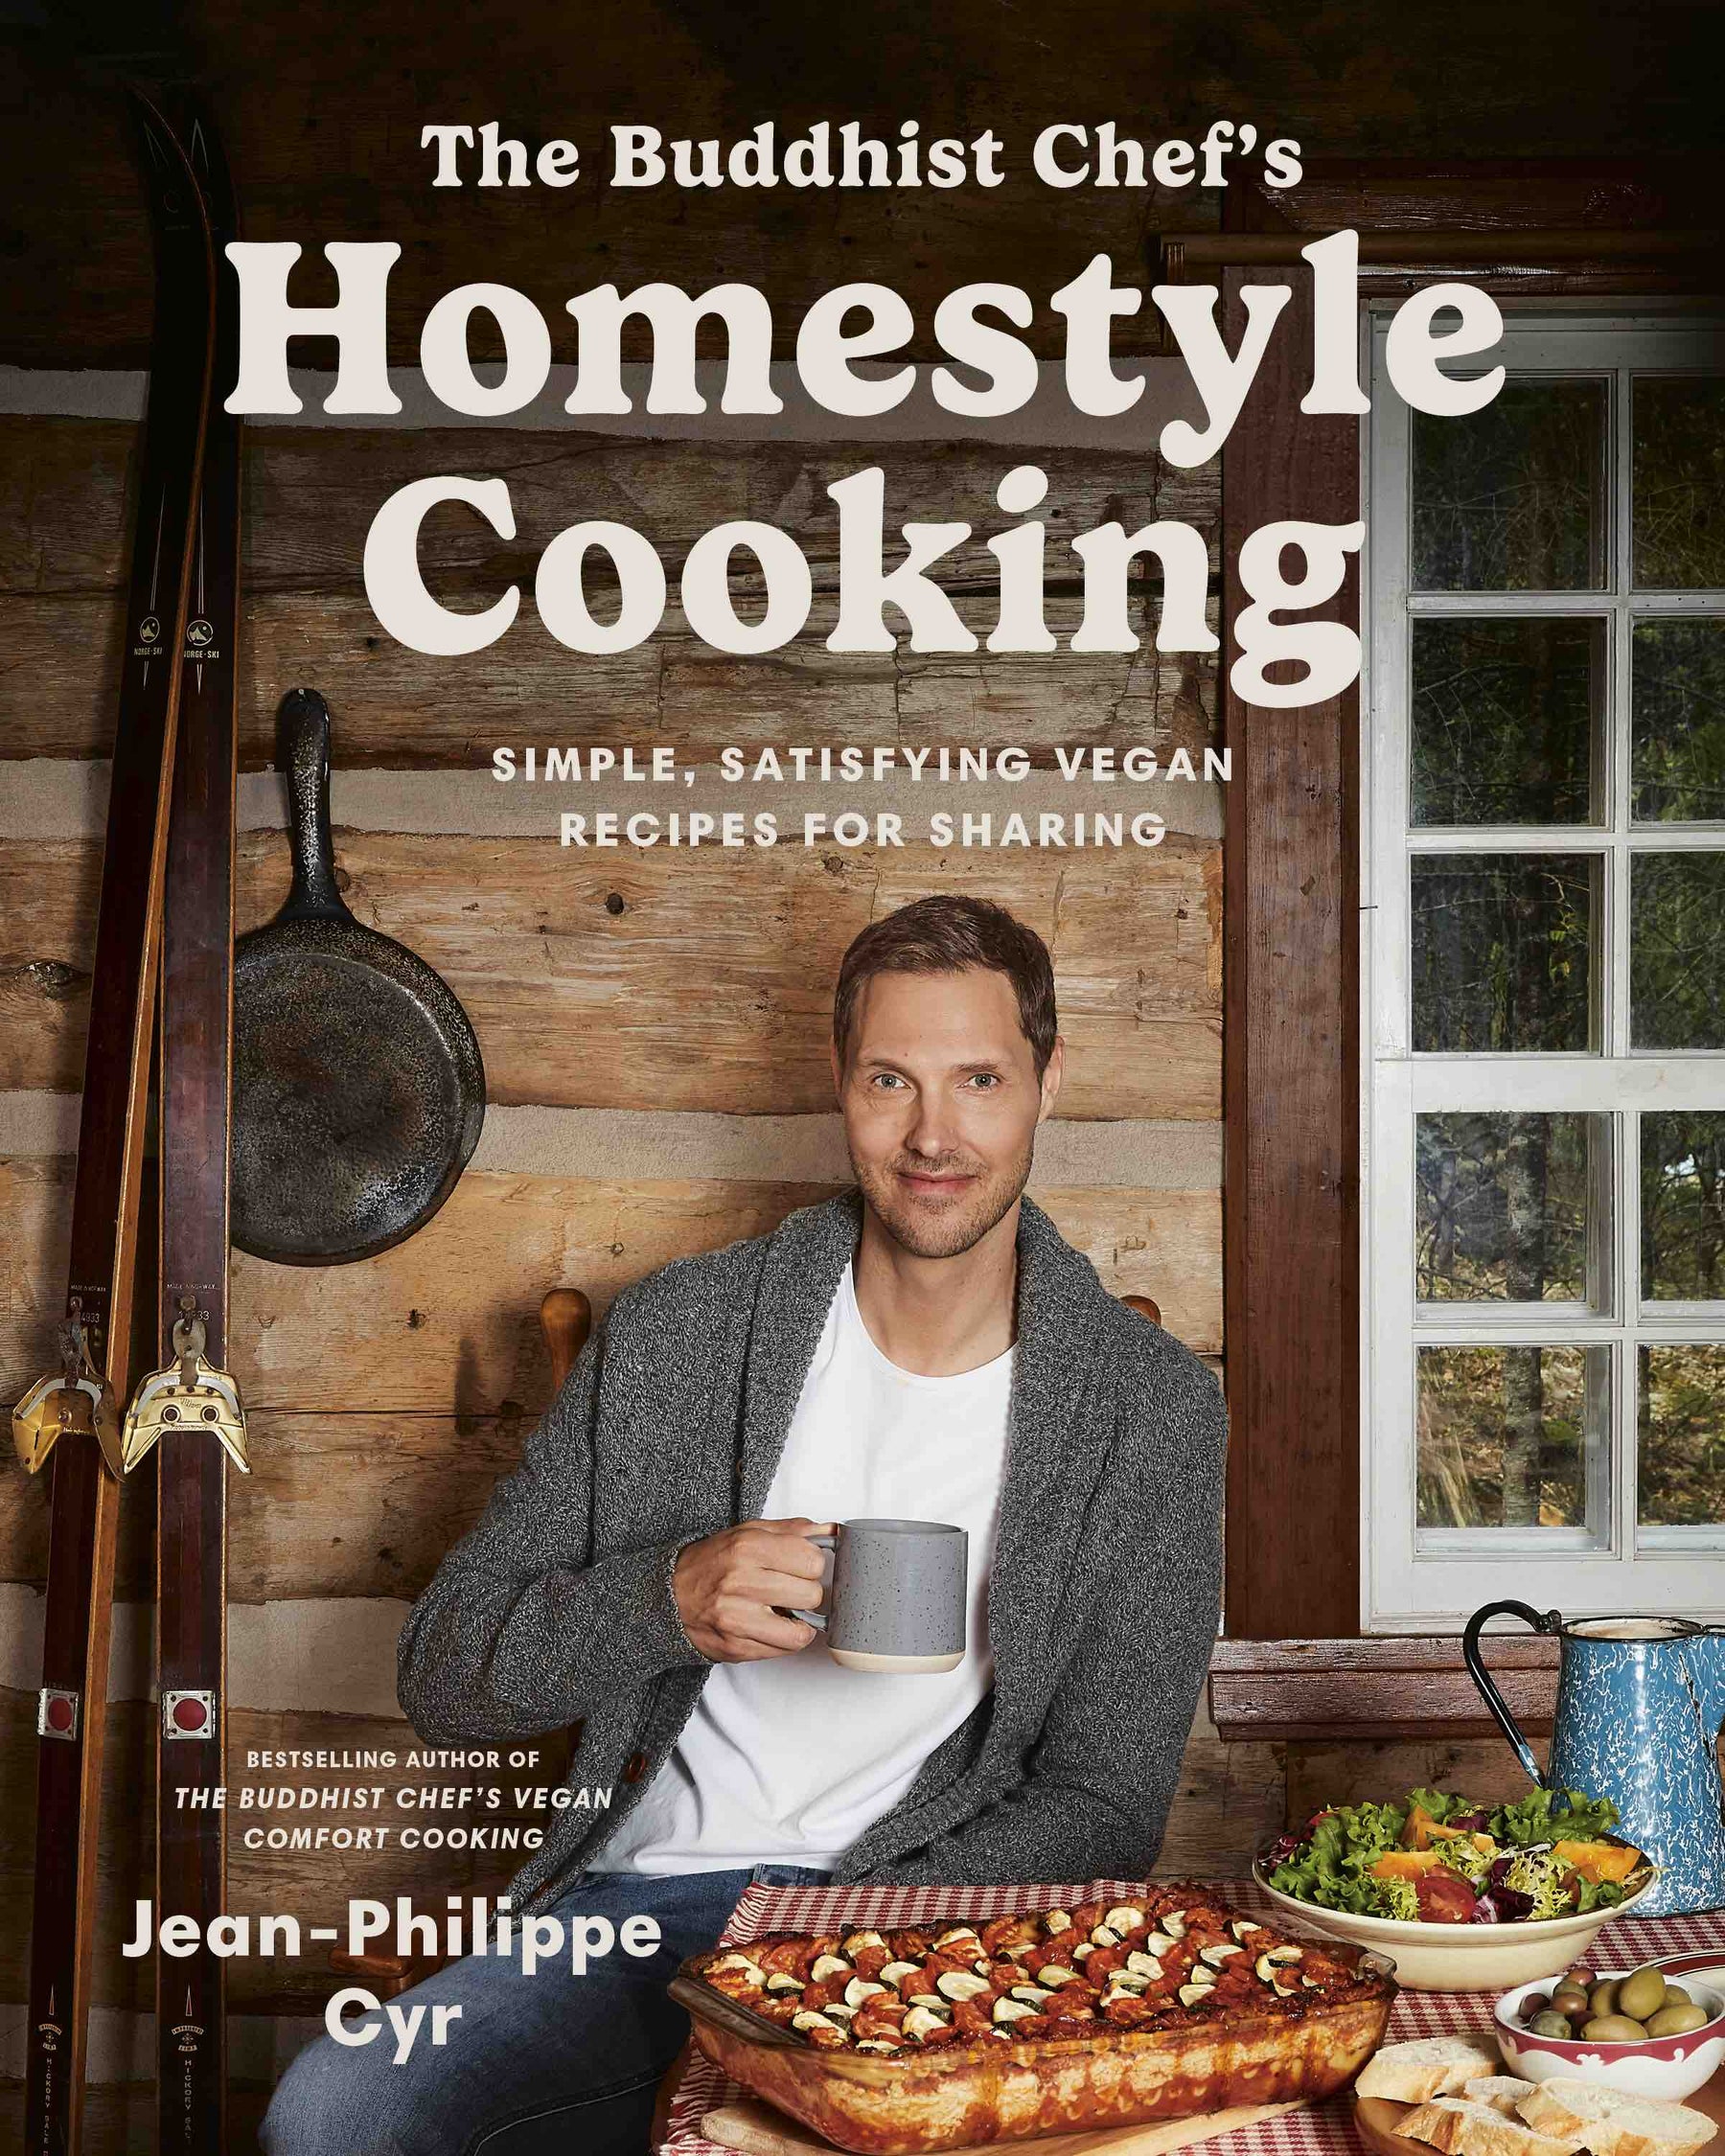 The Buddhist Chef's Homestyle Cooking | by Jean-Philippe Cyr - Random House - Bluecashew Kitchen Homestead